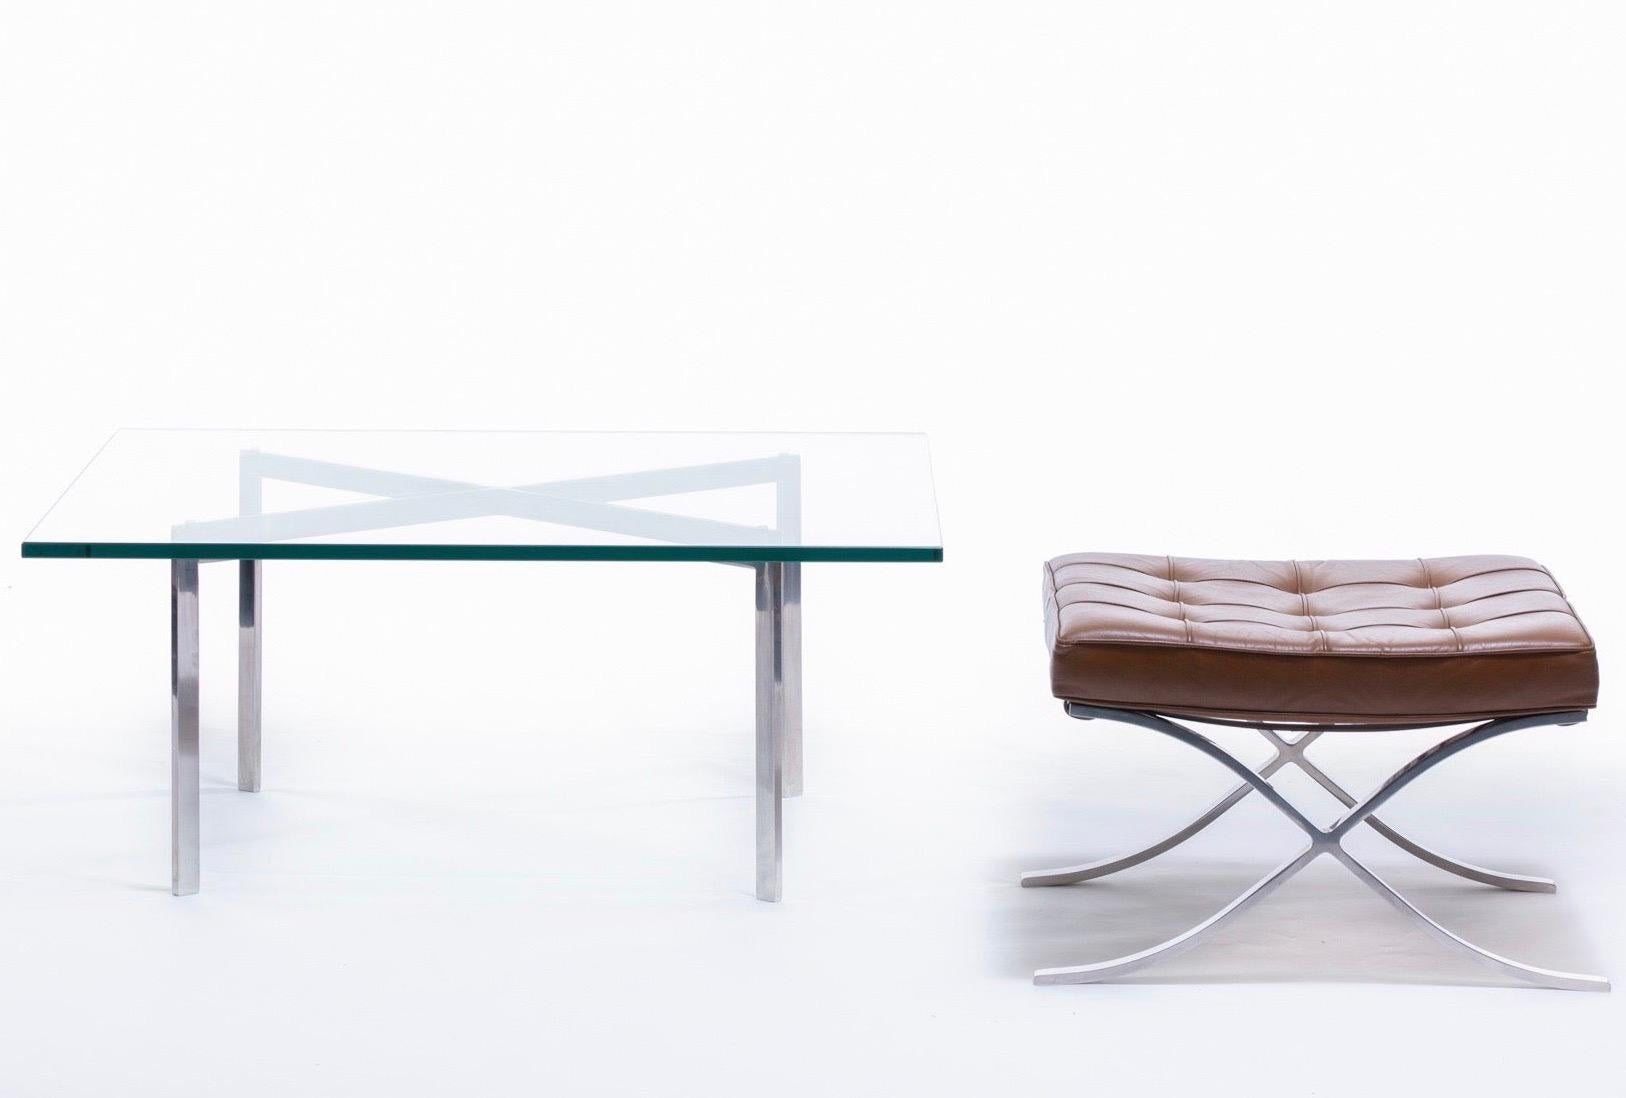 Barcelona coffee table designed by Ludwig Mies van der Rohe and produced by Knoll International circa 1970. Originally created in 1930 for the Mies-designed Villa Tugendhat in Brno, Czech Republic in 1930. Chromed steel 